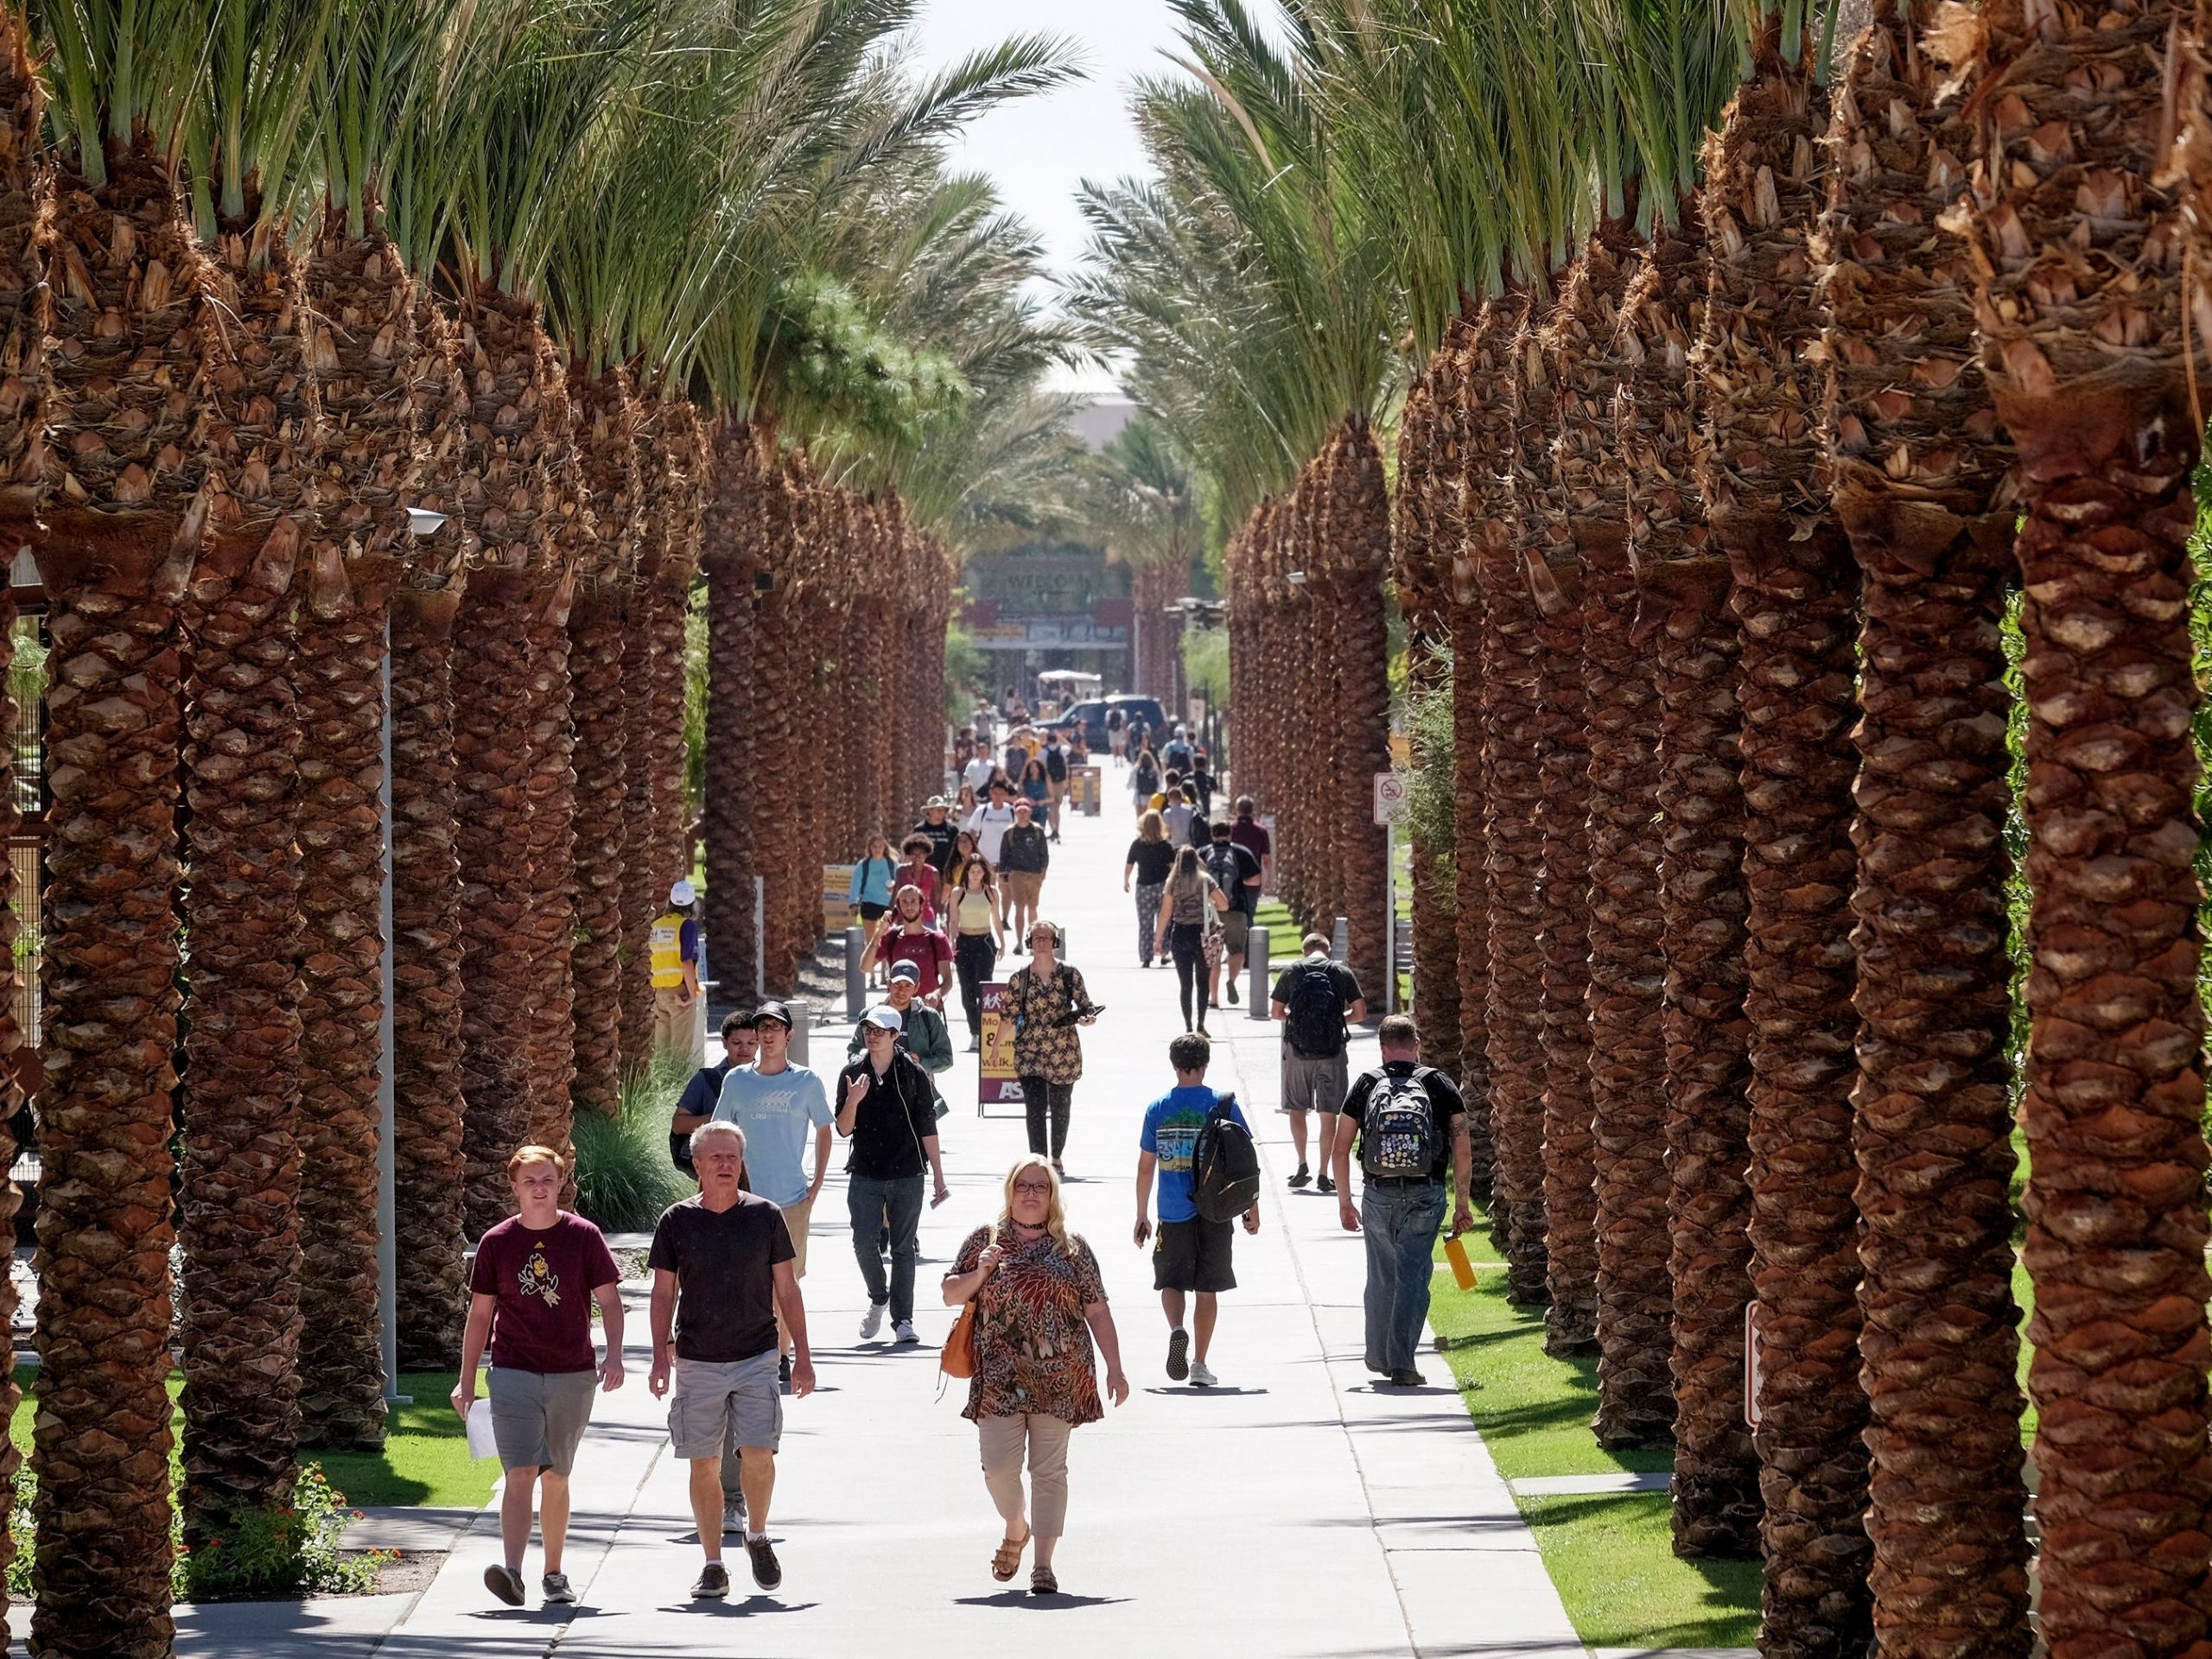 Palm trees line a pedestrian path filled with people at Arizona State University in Tempe, AZ on October 6, 2017.